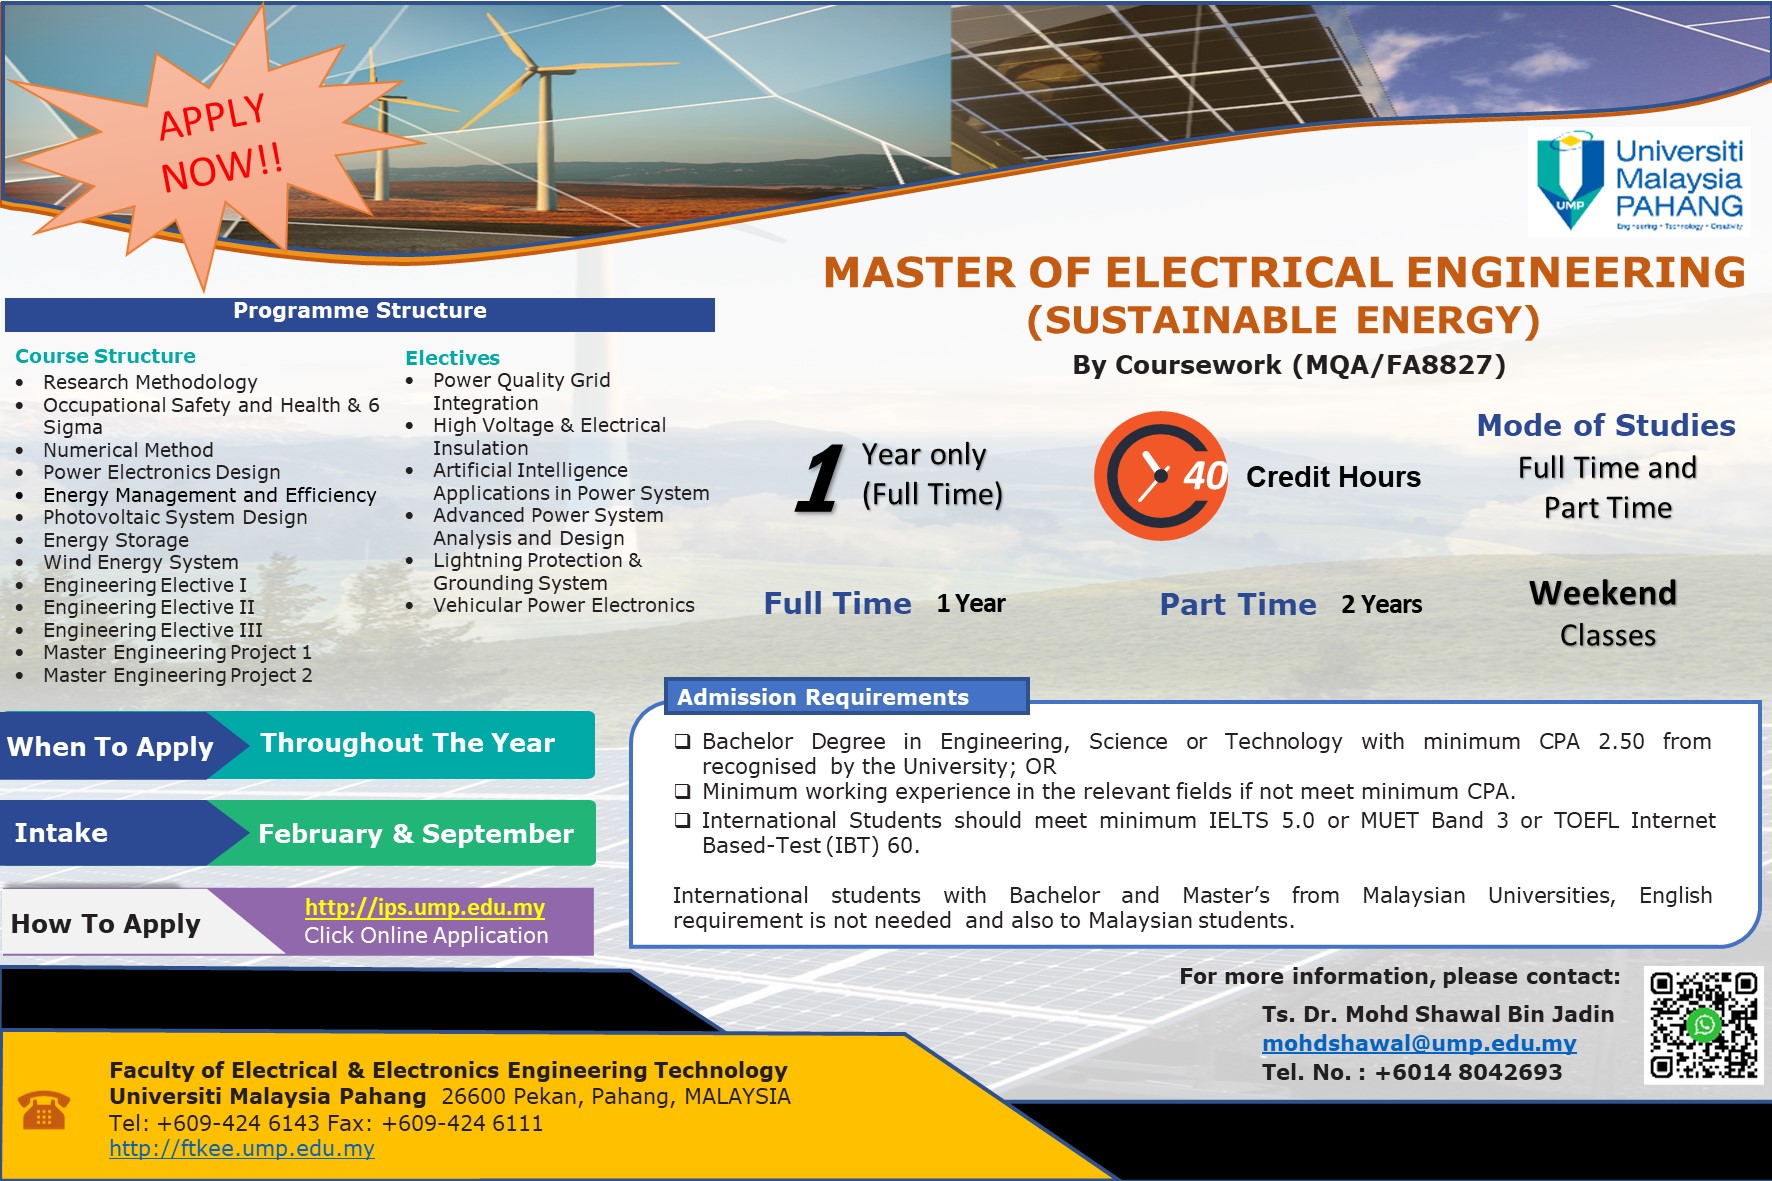 Online Application: Master of Electrical Engineering (Sustainable Energy) by Coursework